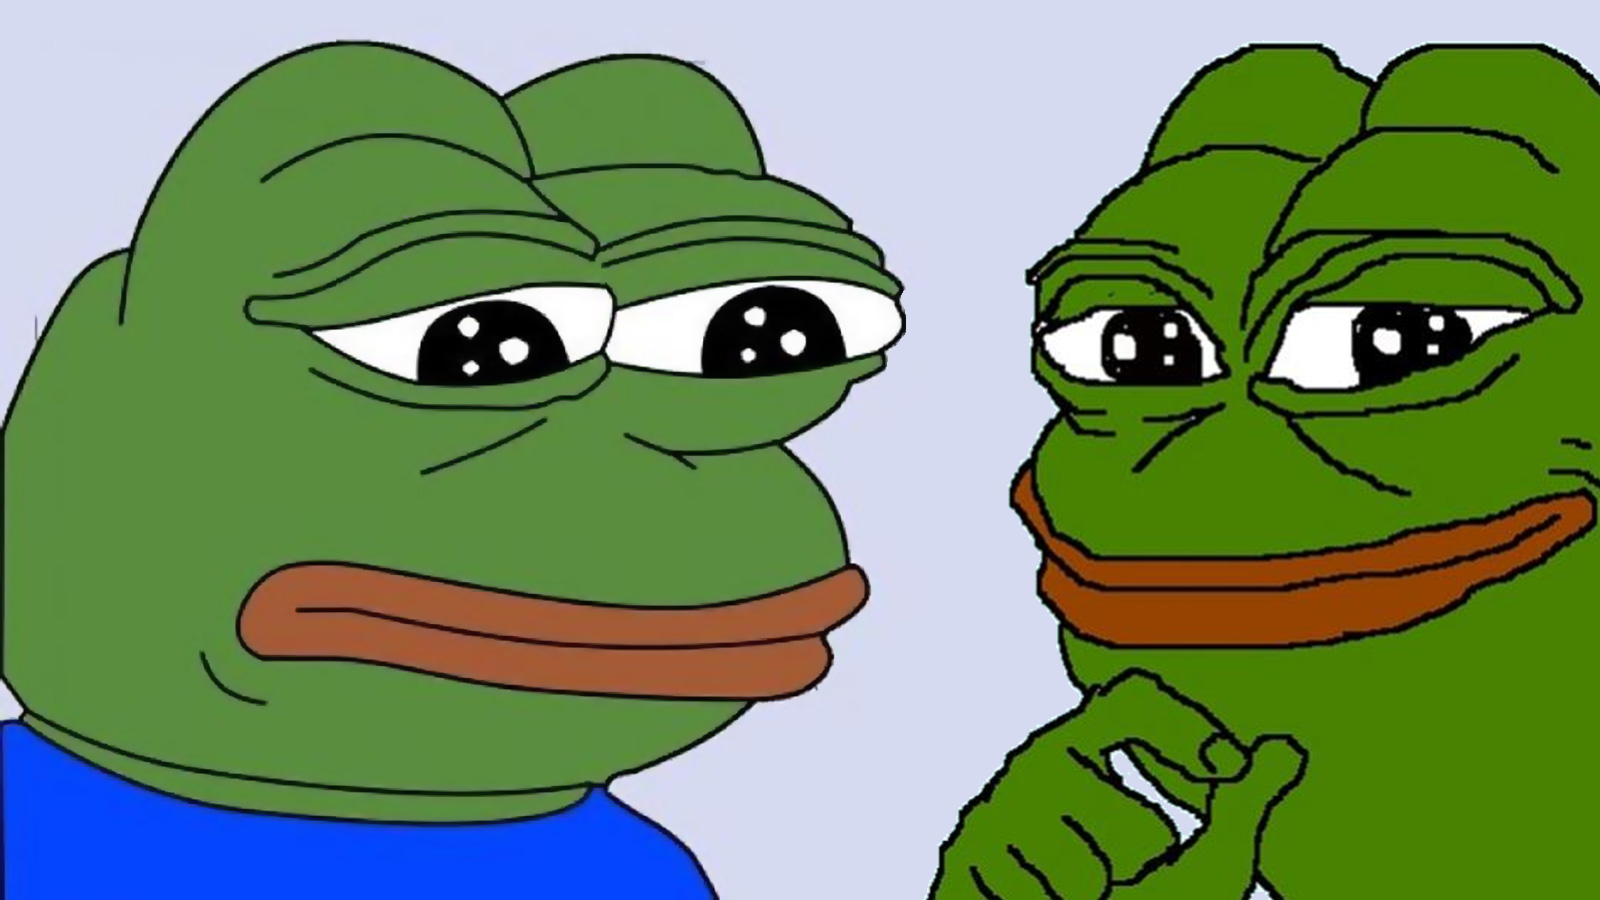  Pepe  the Frog  listed among  common hate symbols by Anti 